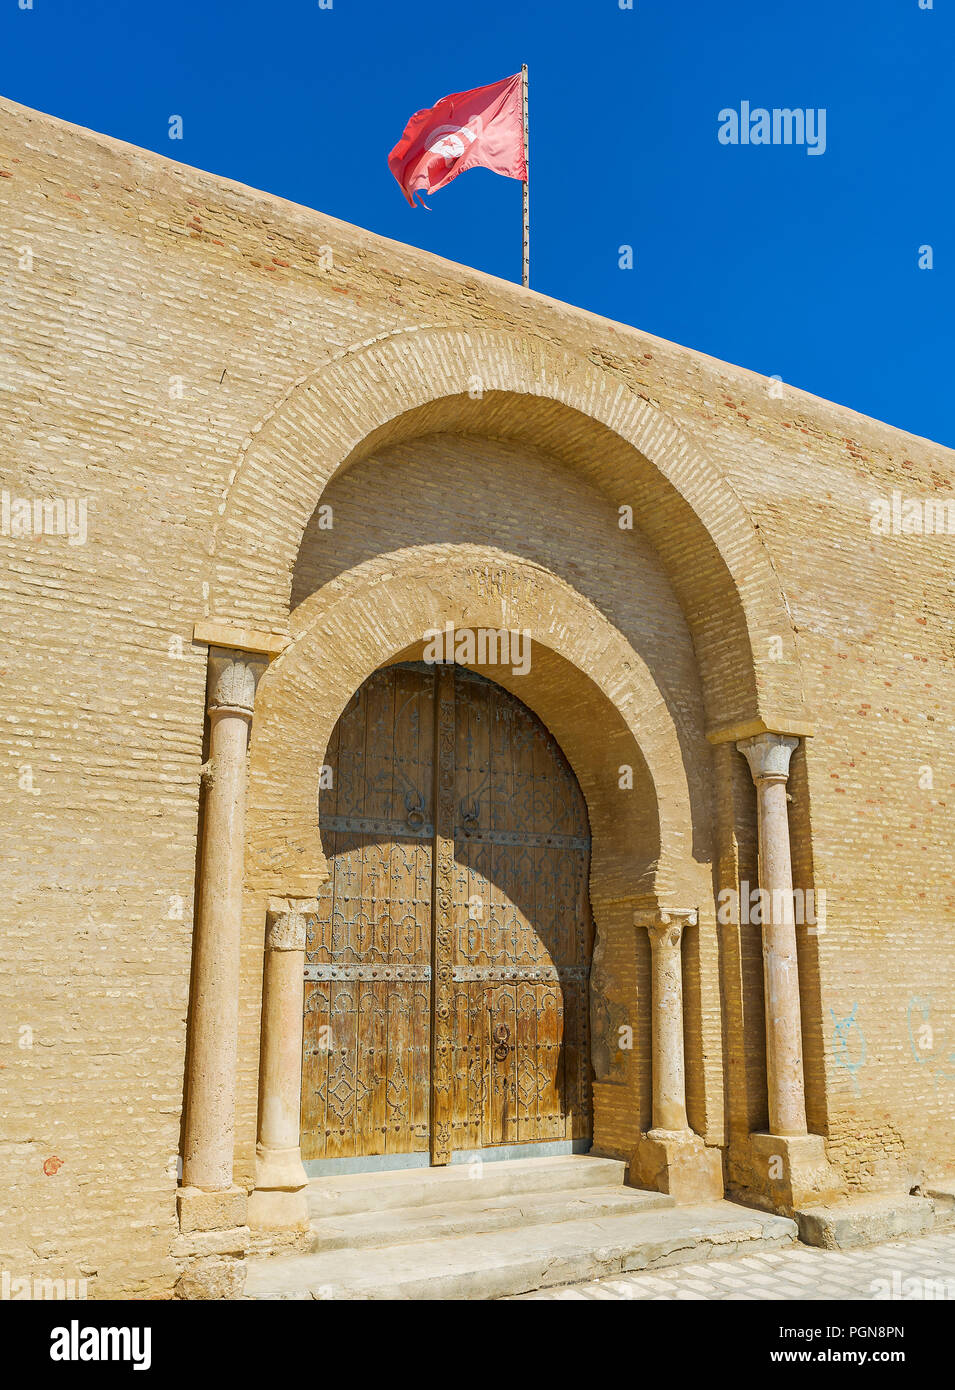 The double horseshoe gate of Zaouia of Sidi Amor Abbada - historical complex with medieval mausoleum and historical museum, Kairouan, Tunisia. Stock Photo